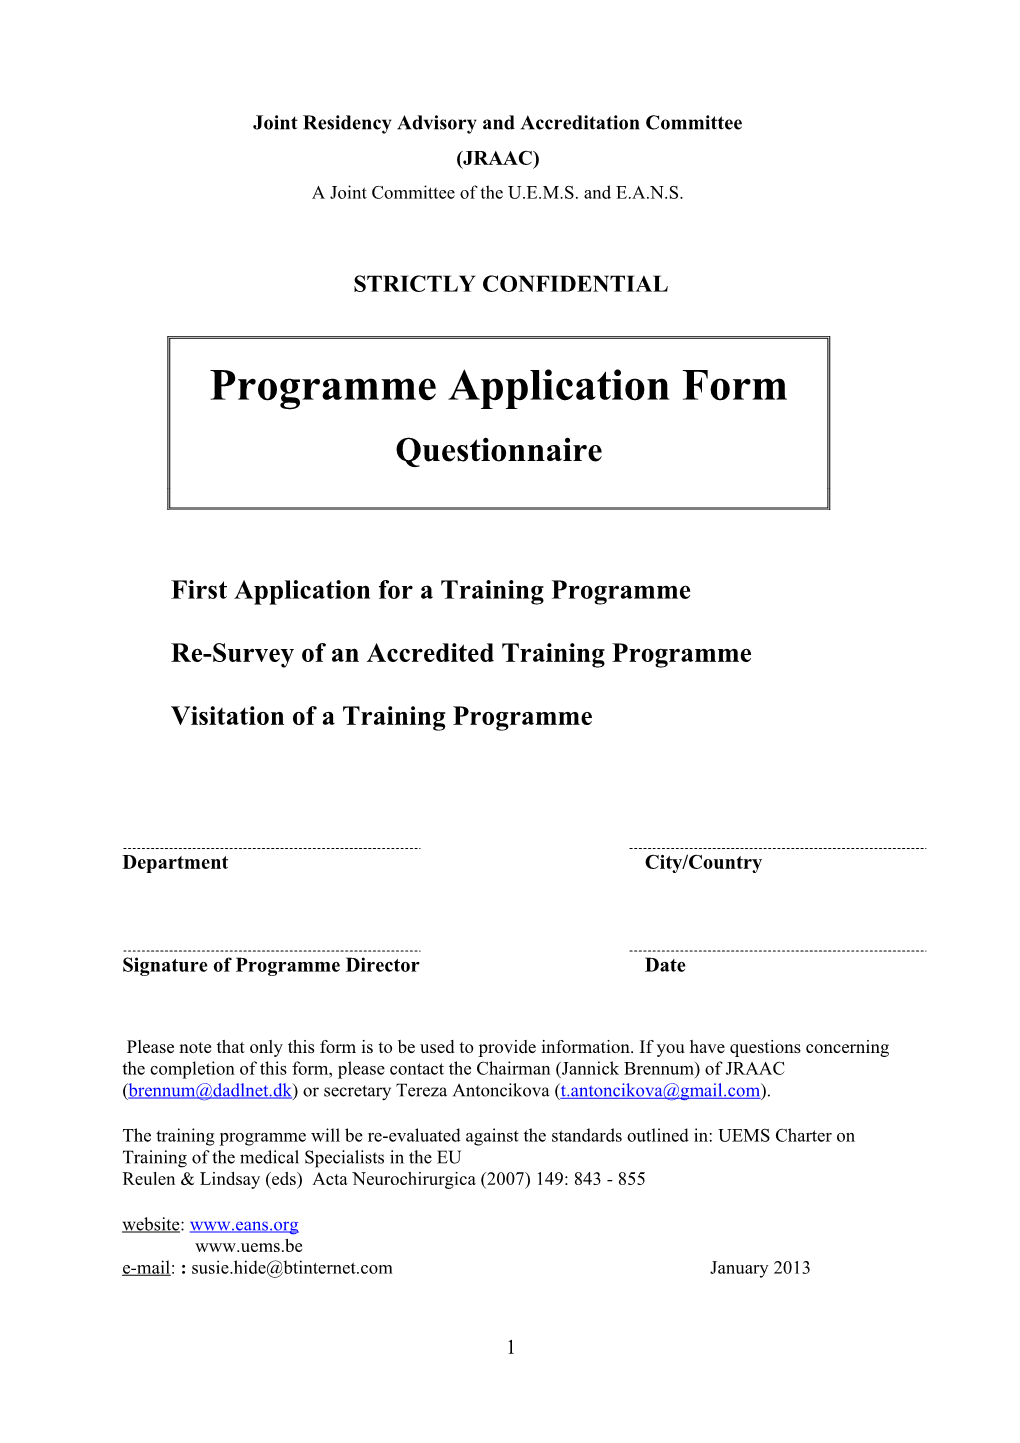 First Application for a Training Programme